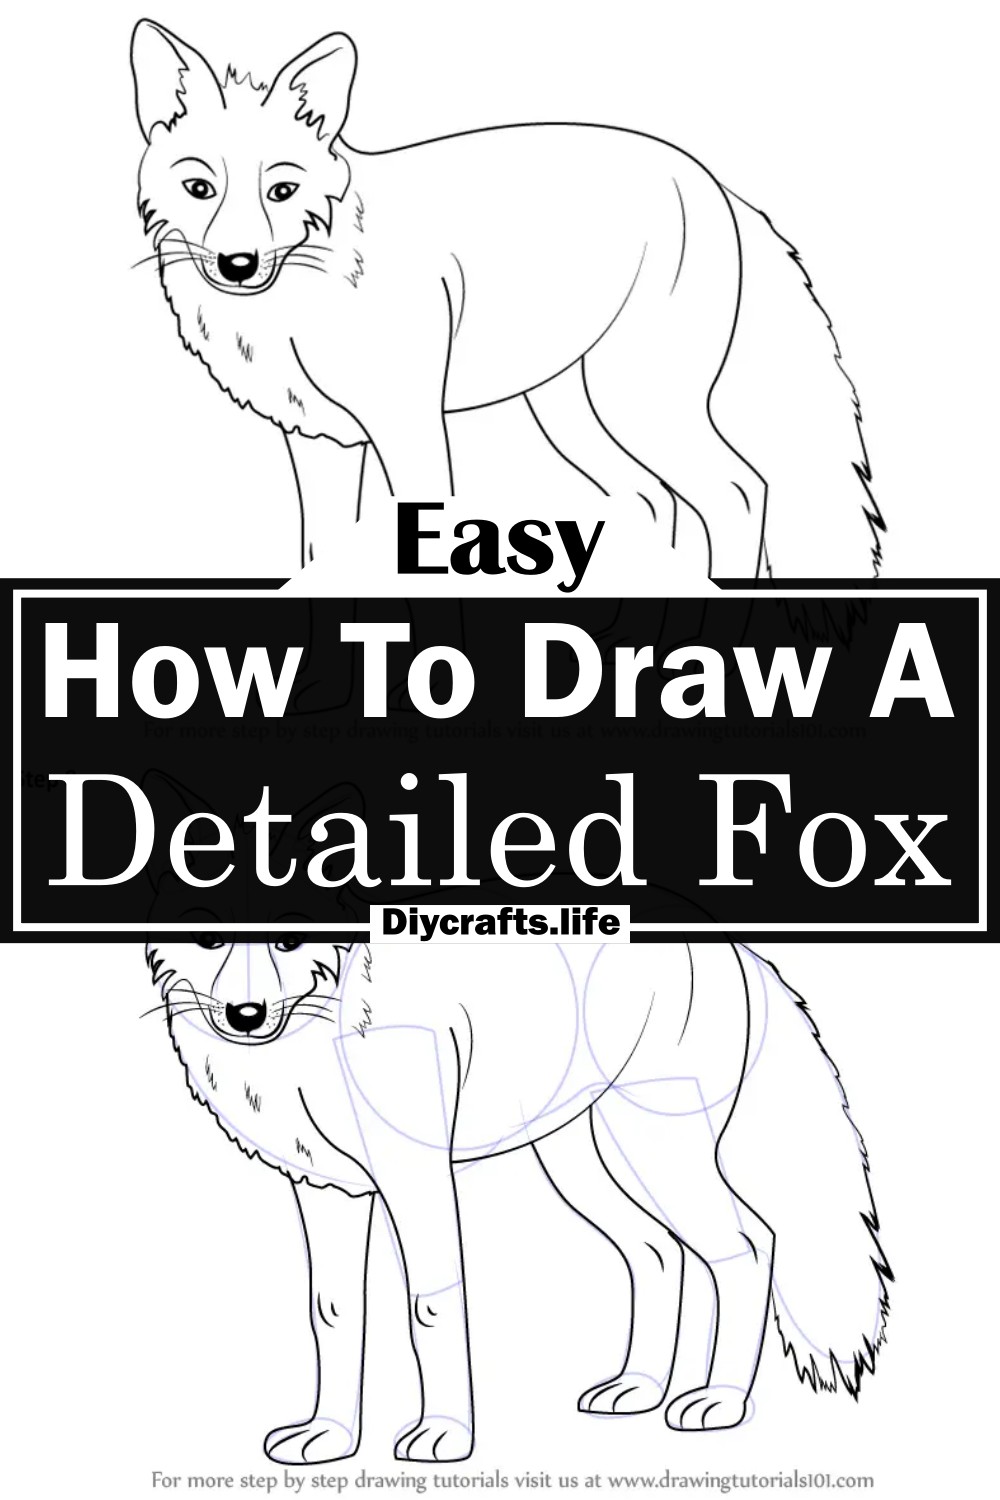 How To Draw A Detailed Fox